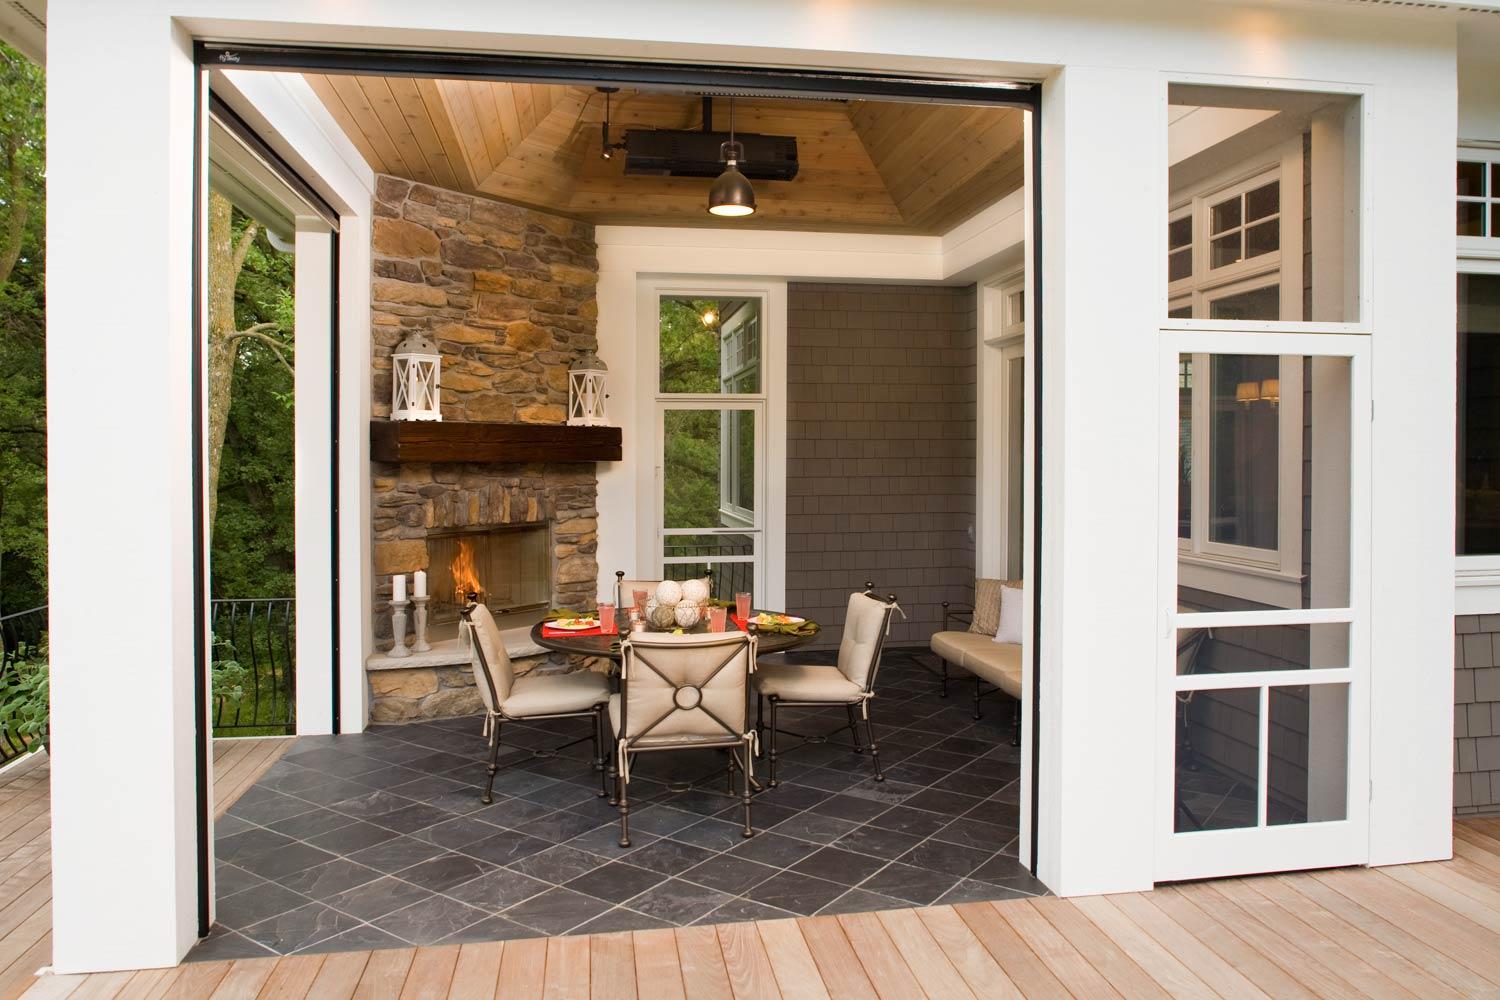 Three-season dining patio with tile floors, fireplace, and retractable screens